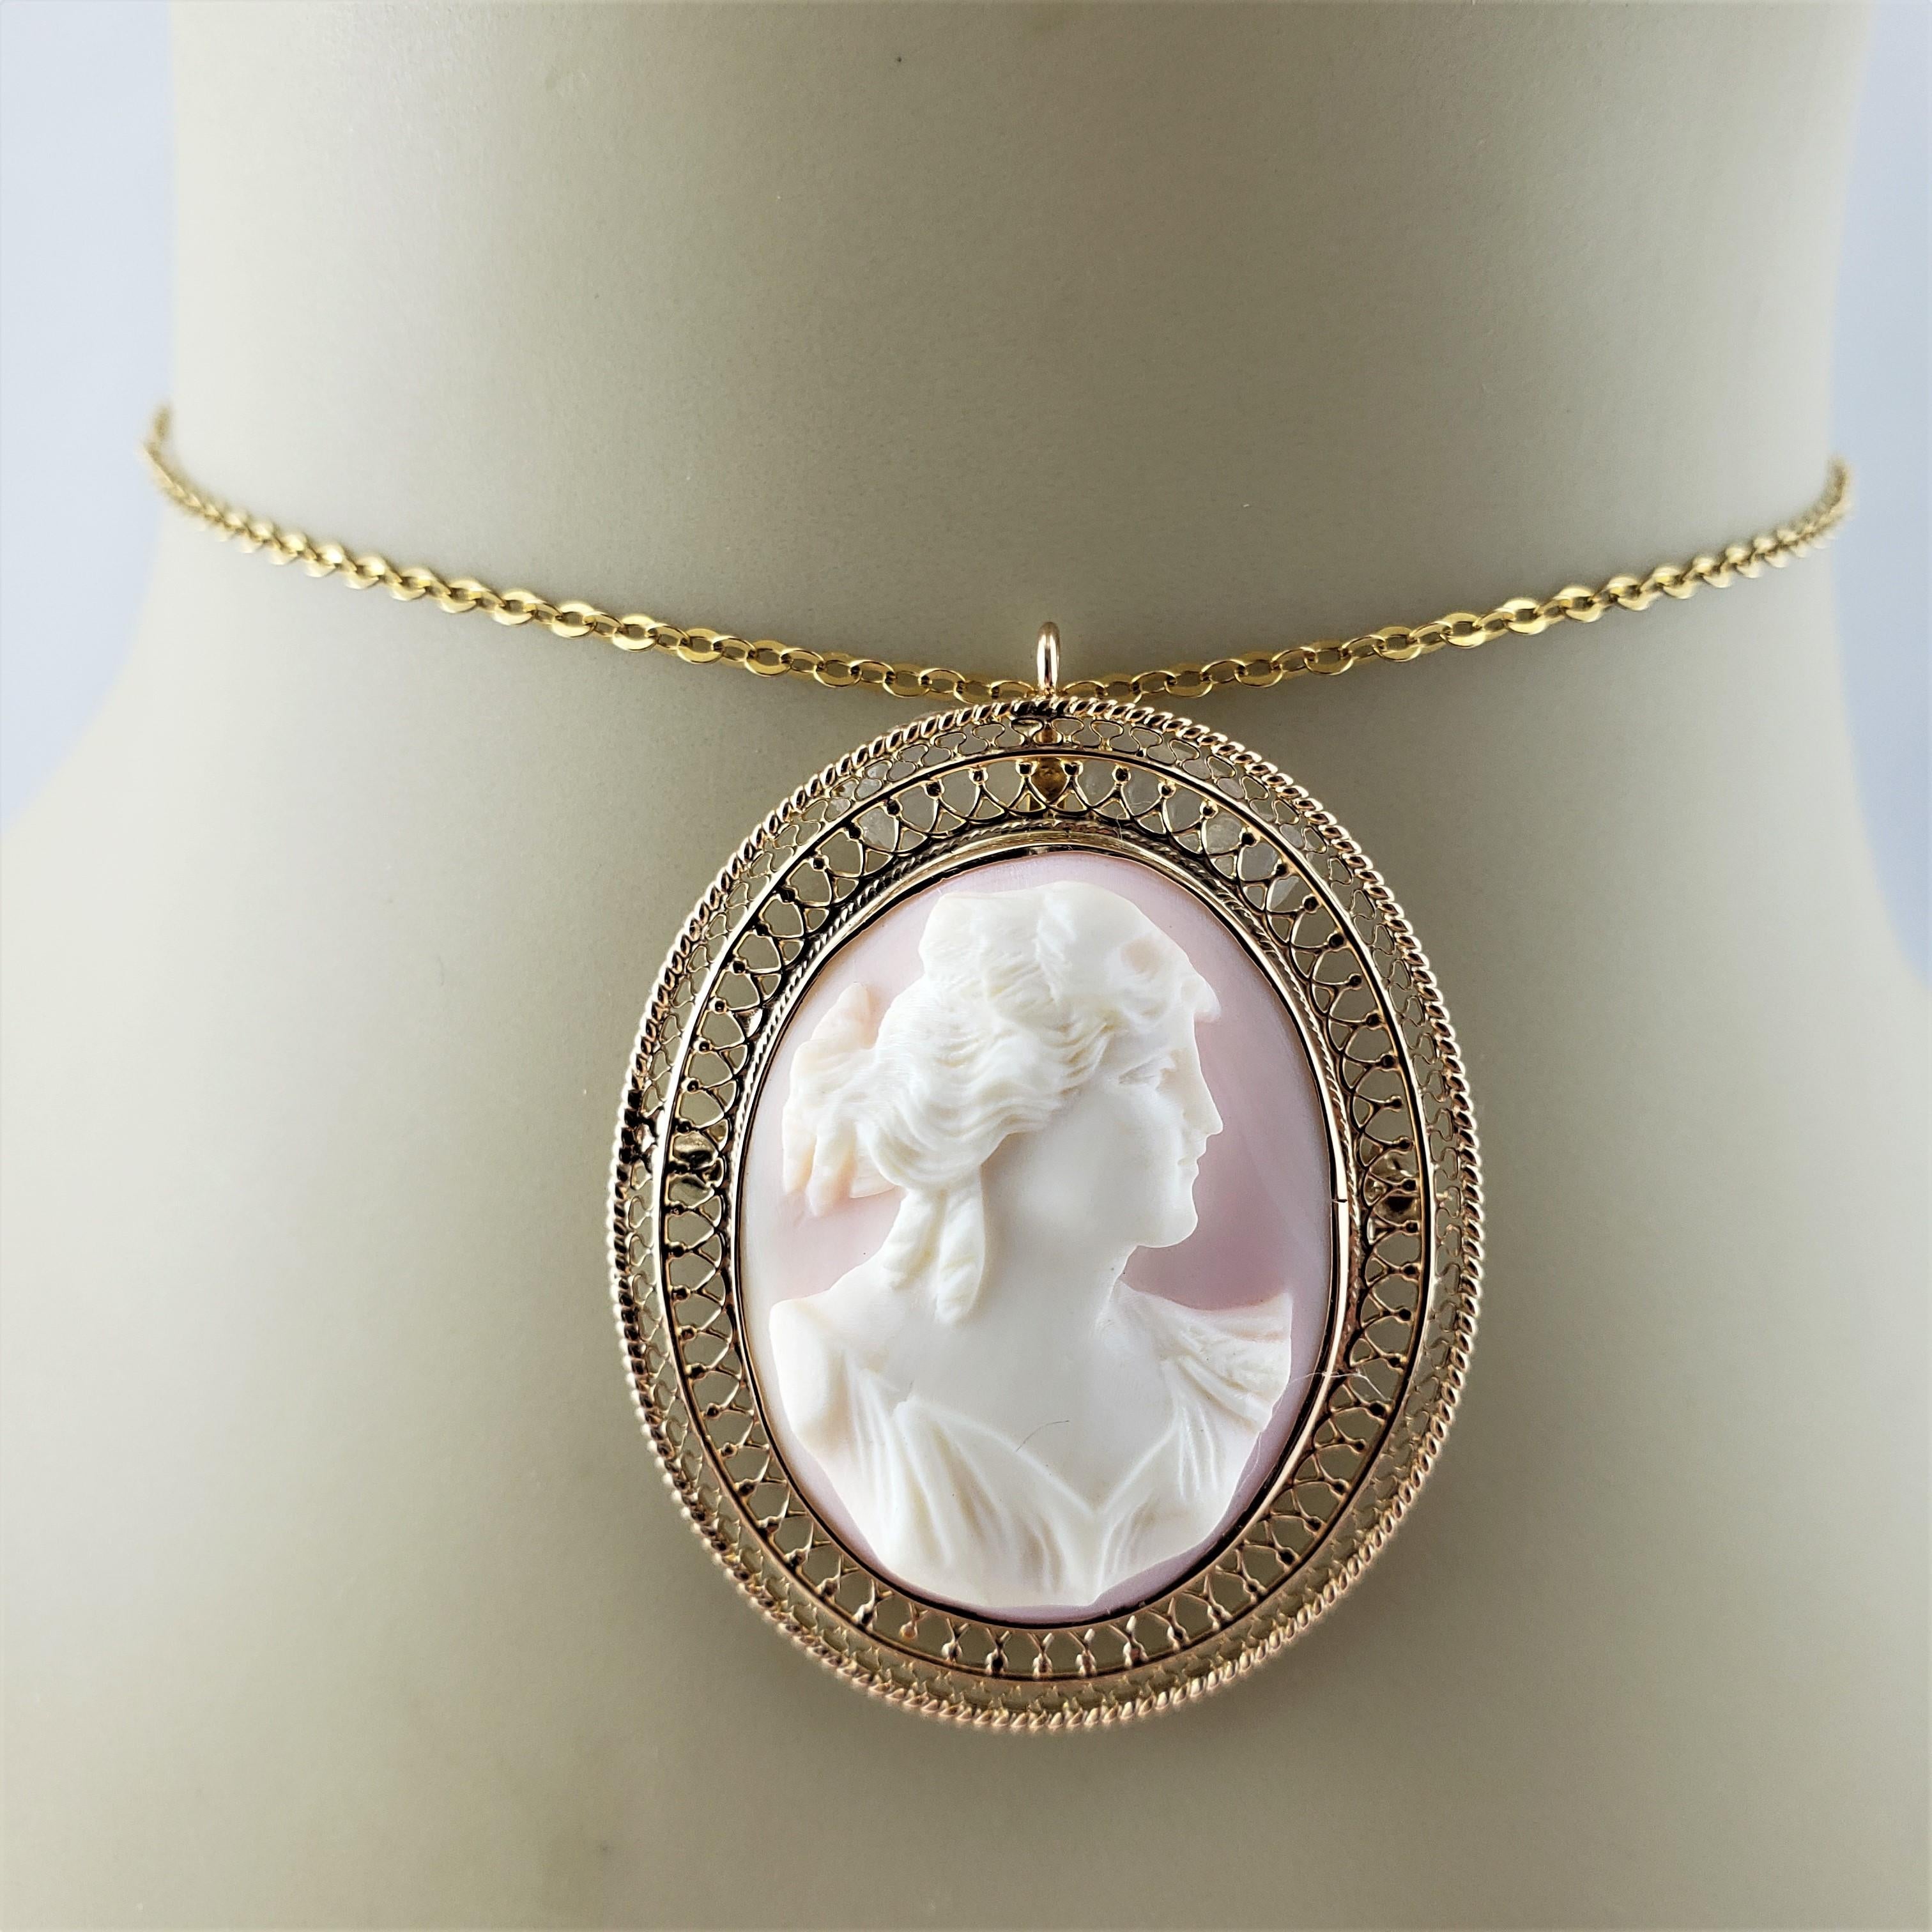 10 Karat Yellow Gold Pink Cameo Brooch/Pendant For Sale 4